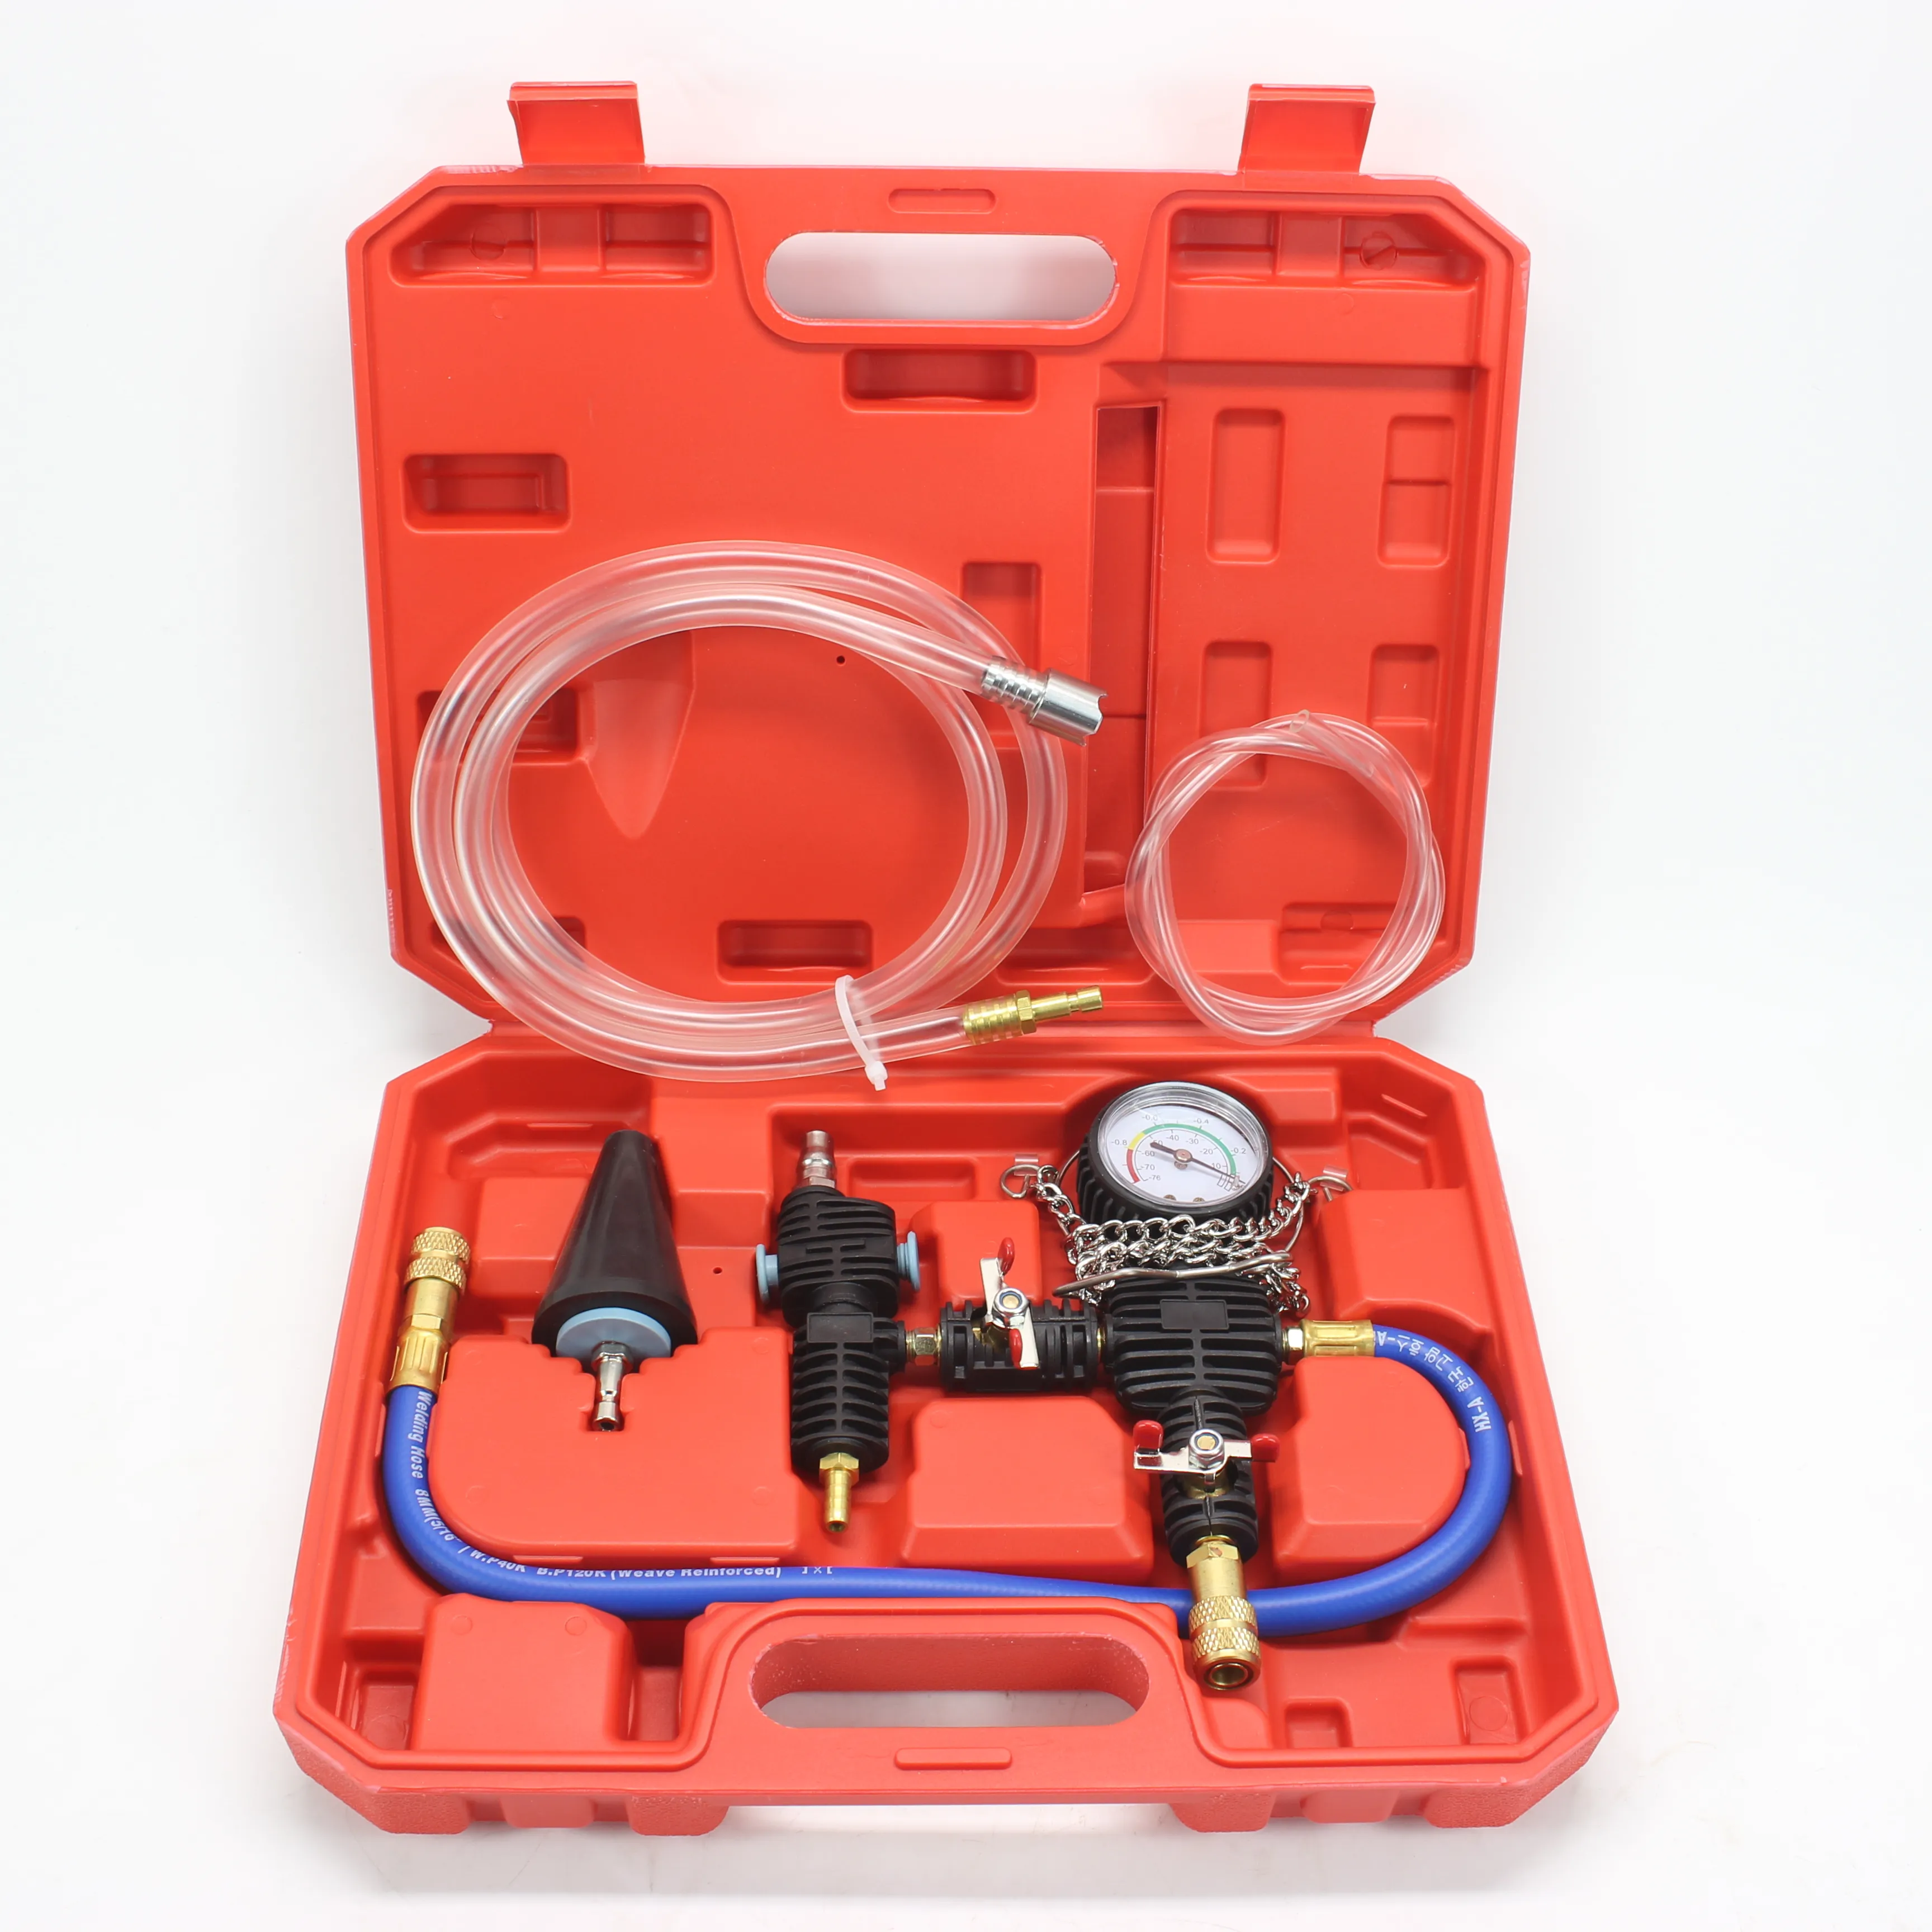 4 pcs Auto Car Universal Radiator Cooling System Vacuum Purge and Refill Kit with Carrying Case